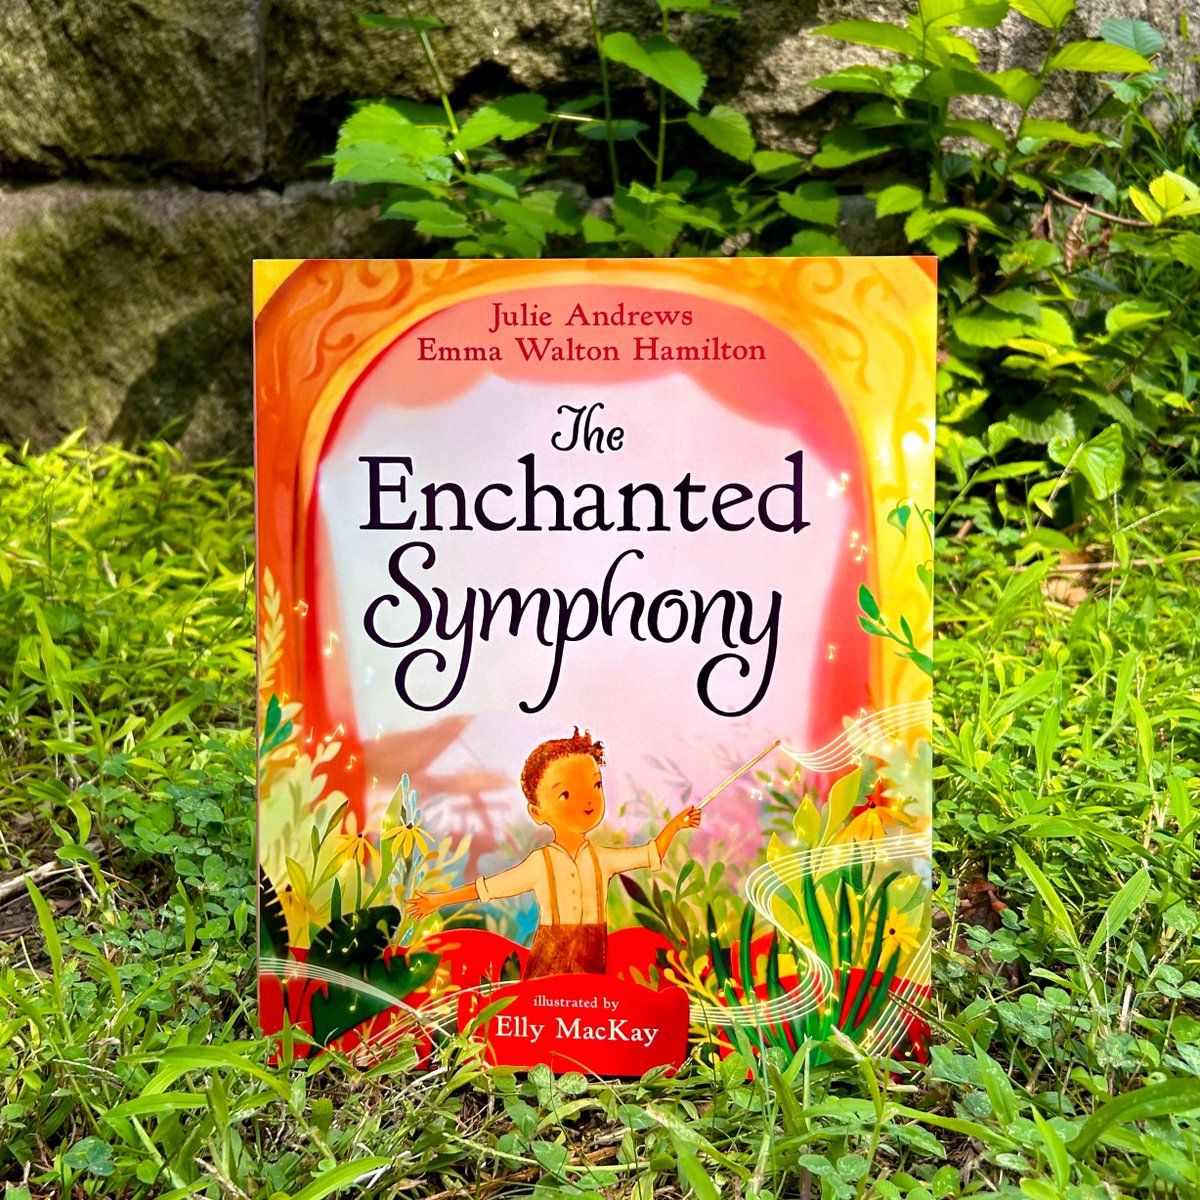 Embrace the power of art, nature, and community with #TheEnchantedSymphony! Have you picked up your copy of this gorgeous new picture book from @JulieAndrews, @ewhamilton, and @theaterclouds yet? bit.ly/3XOsCyR